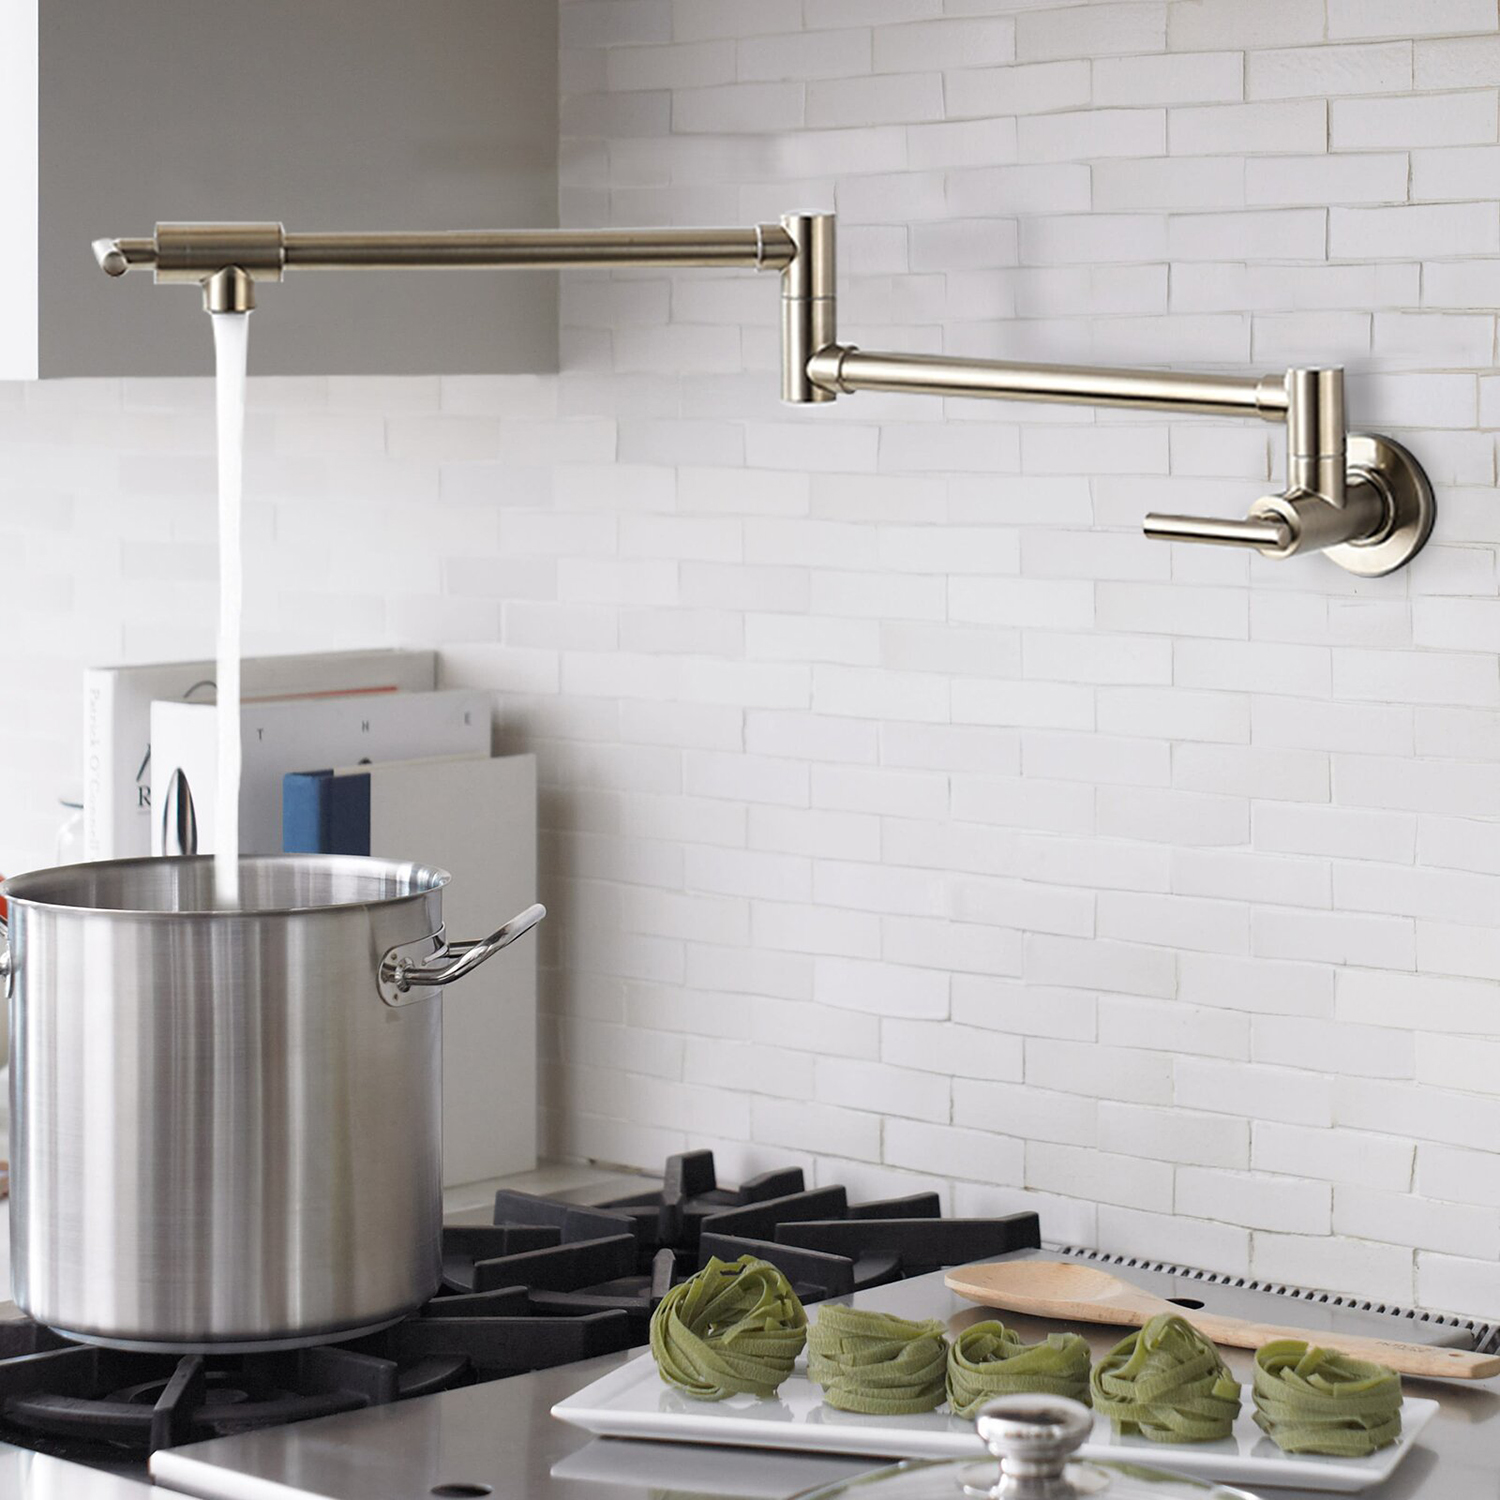 Modern Kitchen Sink Faucet Folding Stretchable with Single Hole Wall Mount Pot Filler Kitchen Faucet Solid Brass Two Handles Pot Filler Folding Faucets